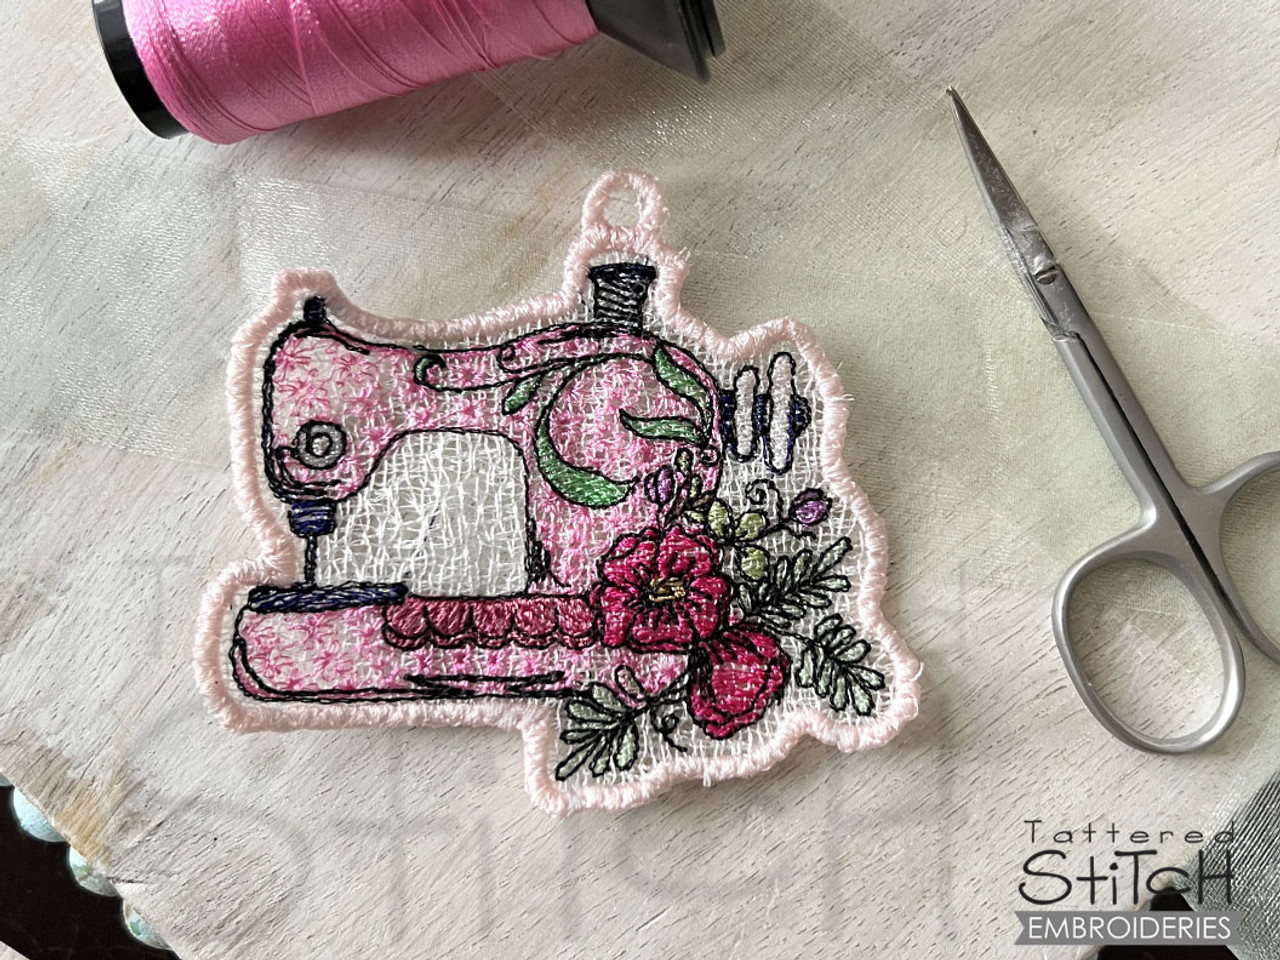 Purchase Wholesale embroidery patterns. Free Returns & Net 60